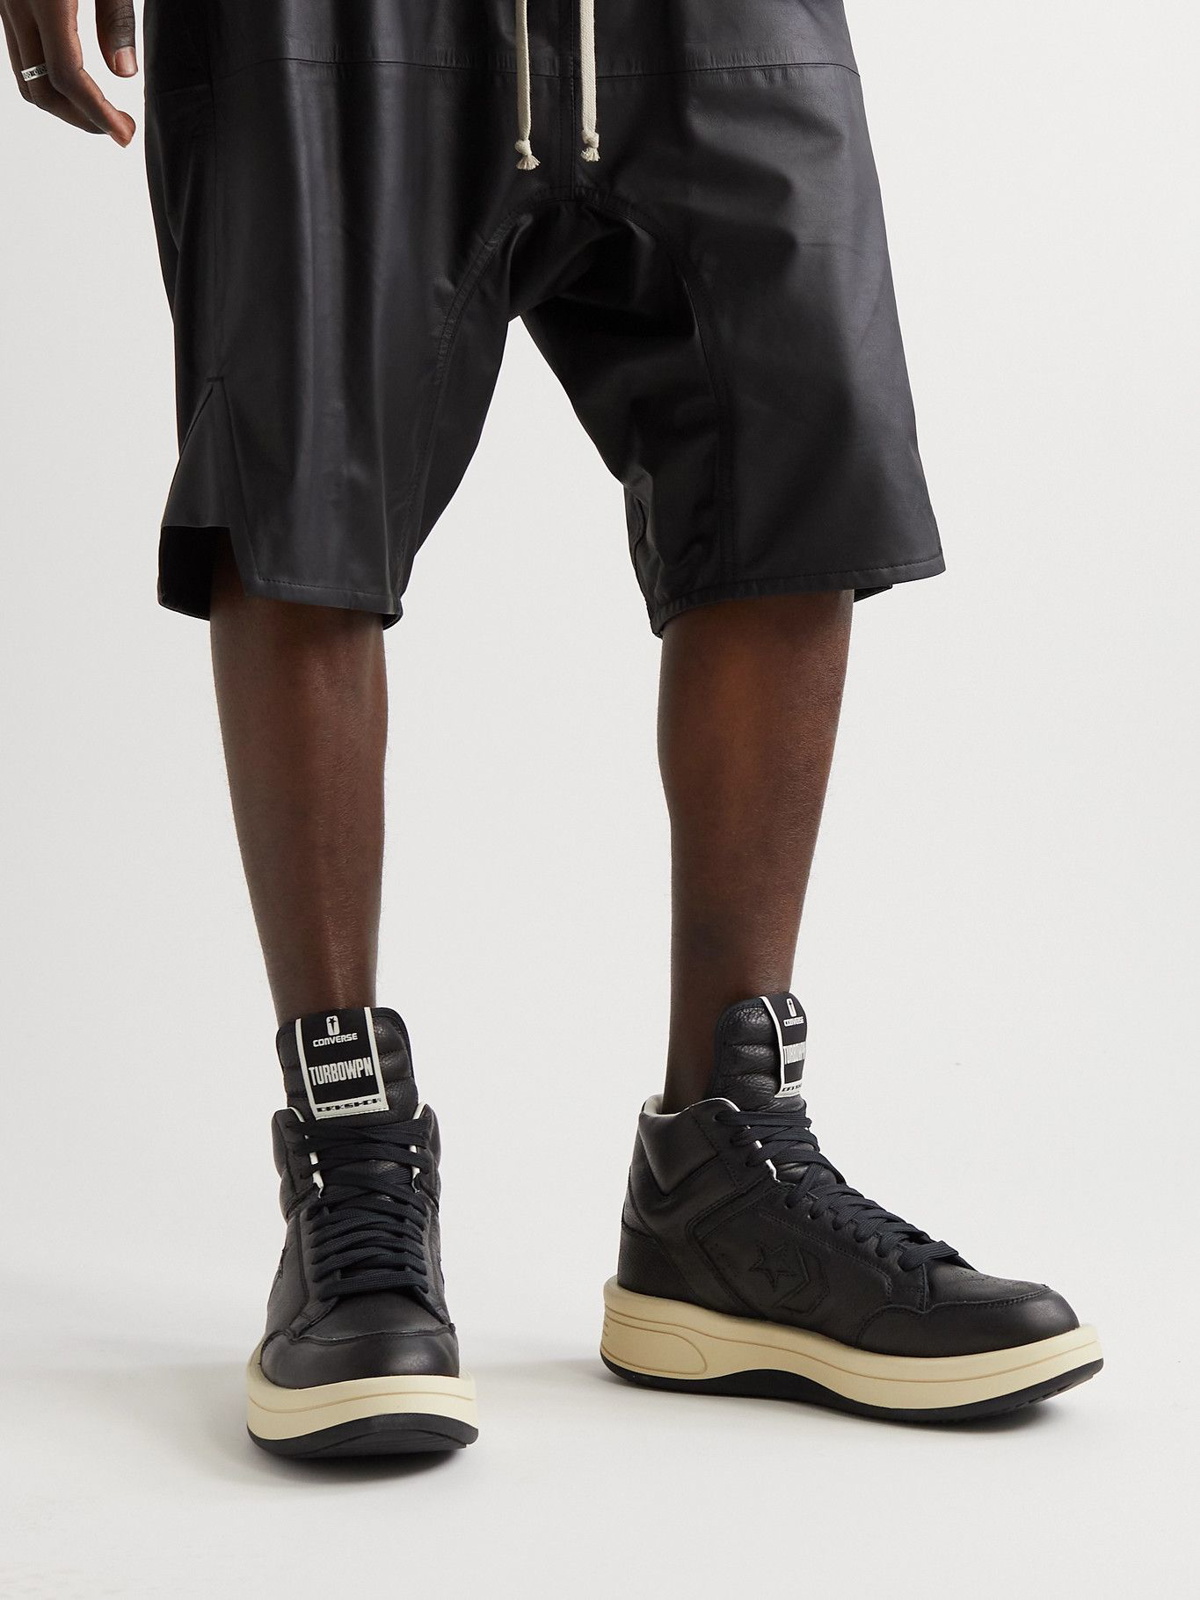 Rick Owens - Converse TURBOWPN Weapon Leather High-Top Sneakers - Black ...